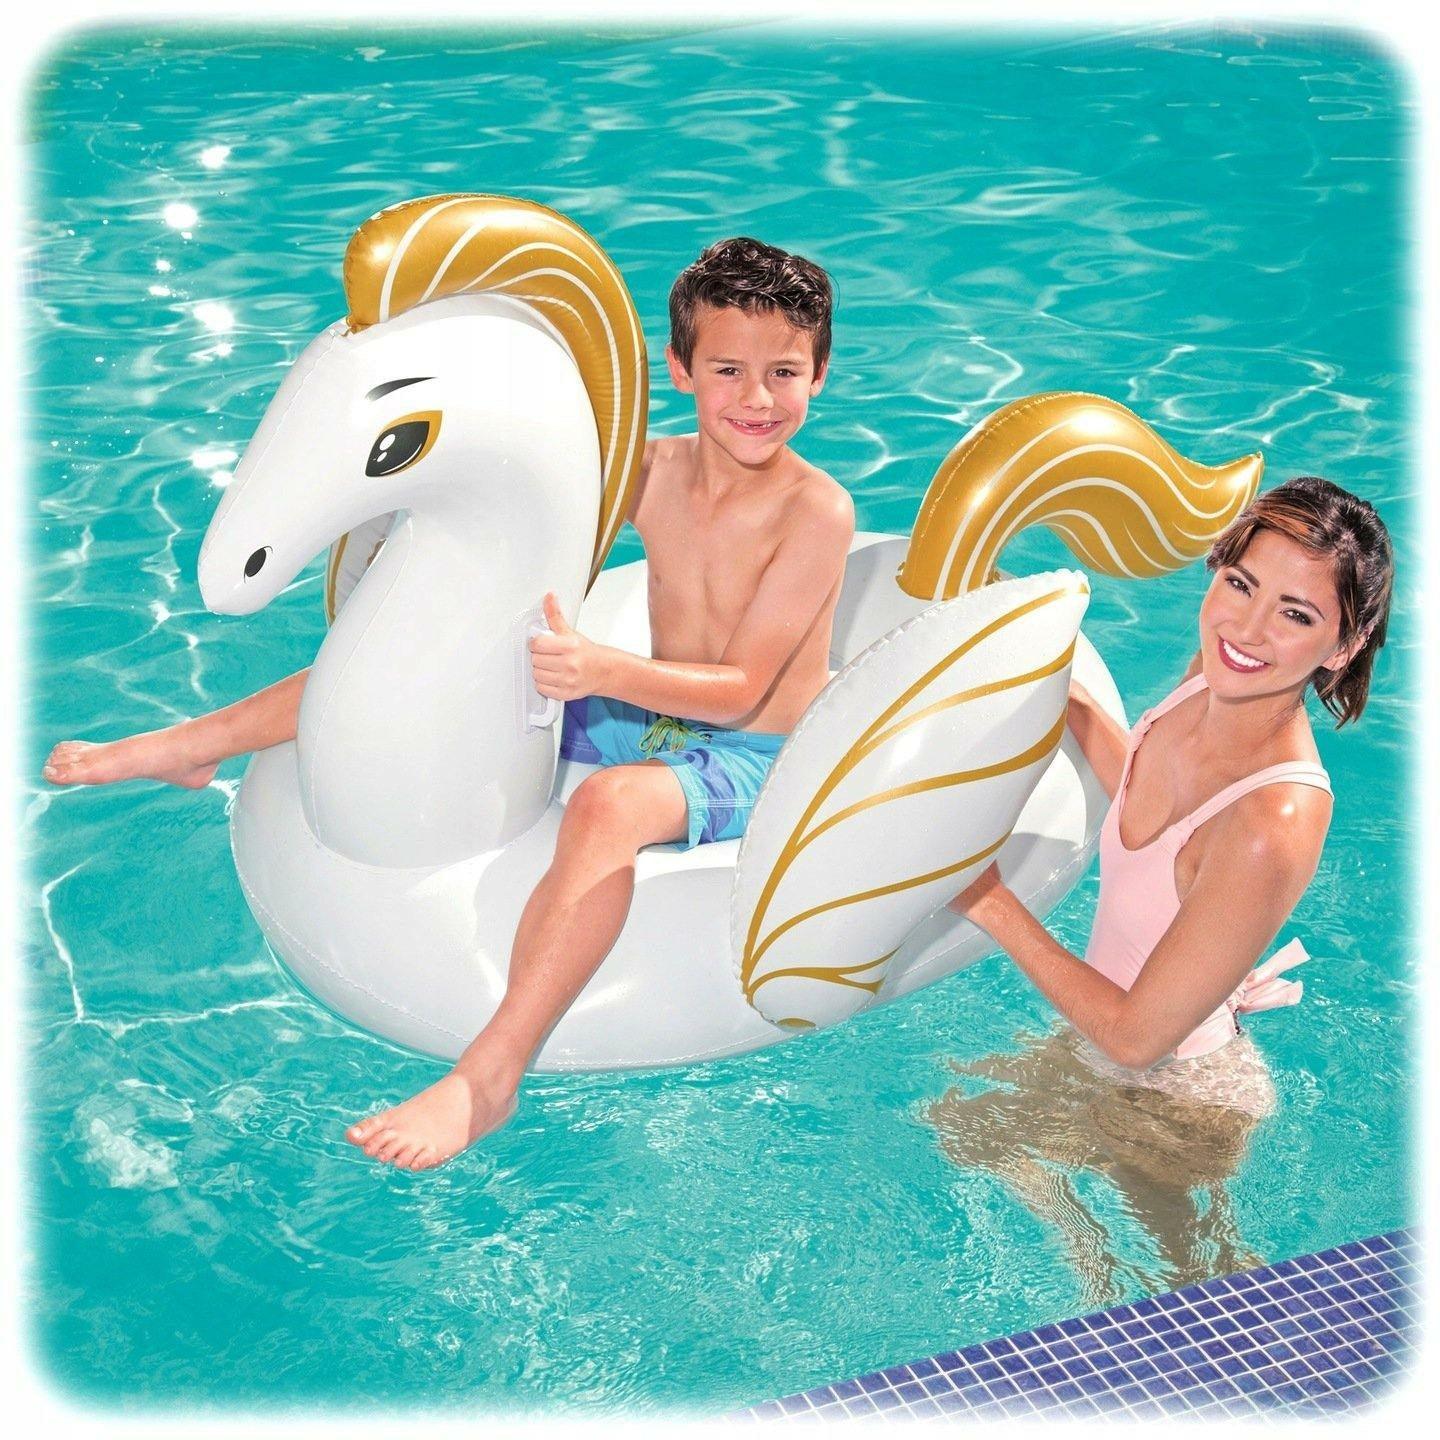 Bestway 41121 Pegasus Inflatable Ride-On Float - White & Gold 159 x 109 cm - BumbleToys - 8-13 Years, Boys, Eagle Plus, Floaters, Girls, Inflatables, Sand Toys Pools & Inflatables